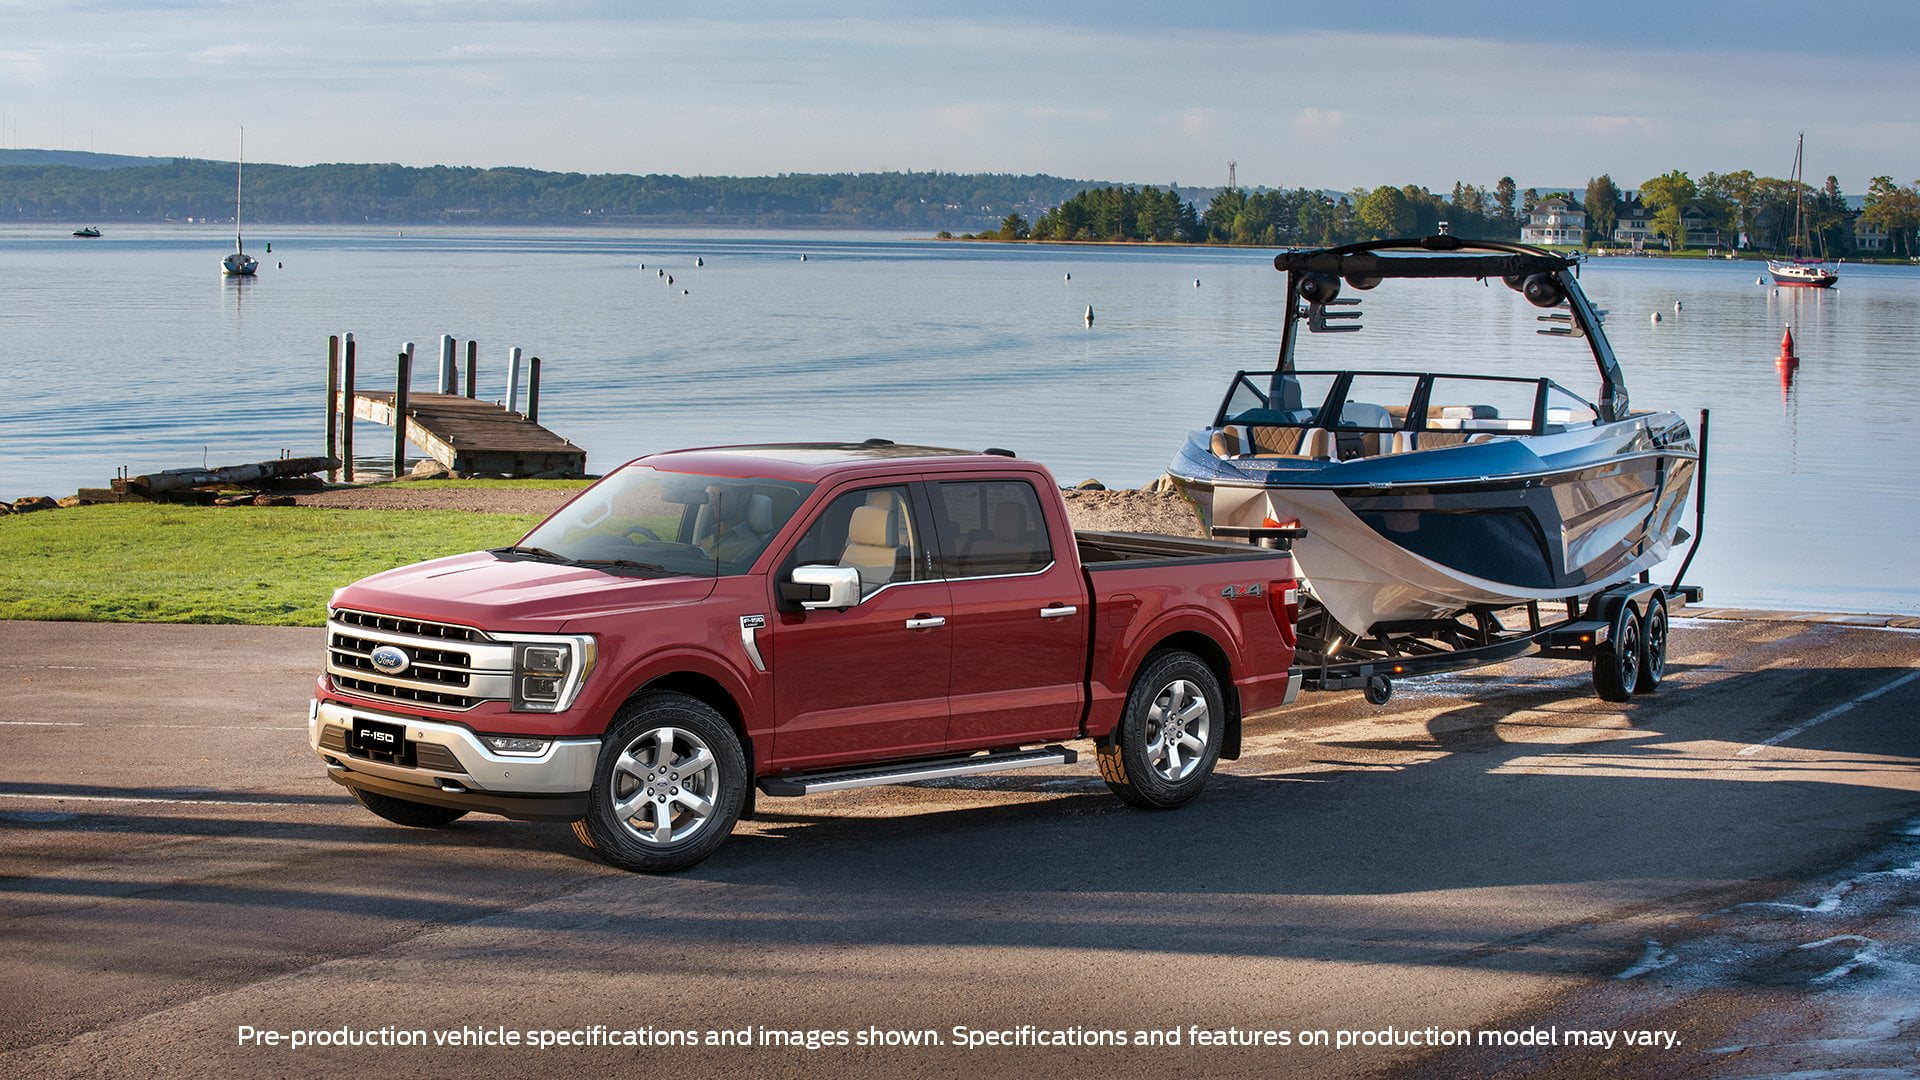 2023 Ford F-150 launching a boat